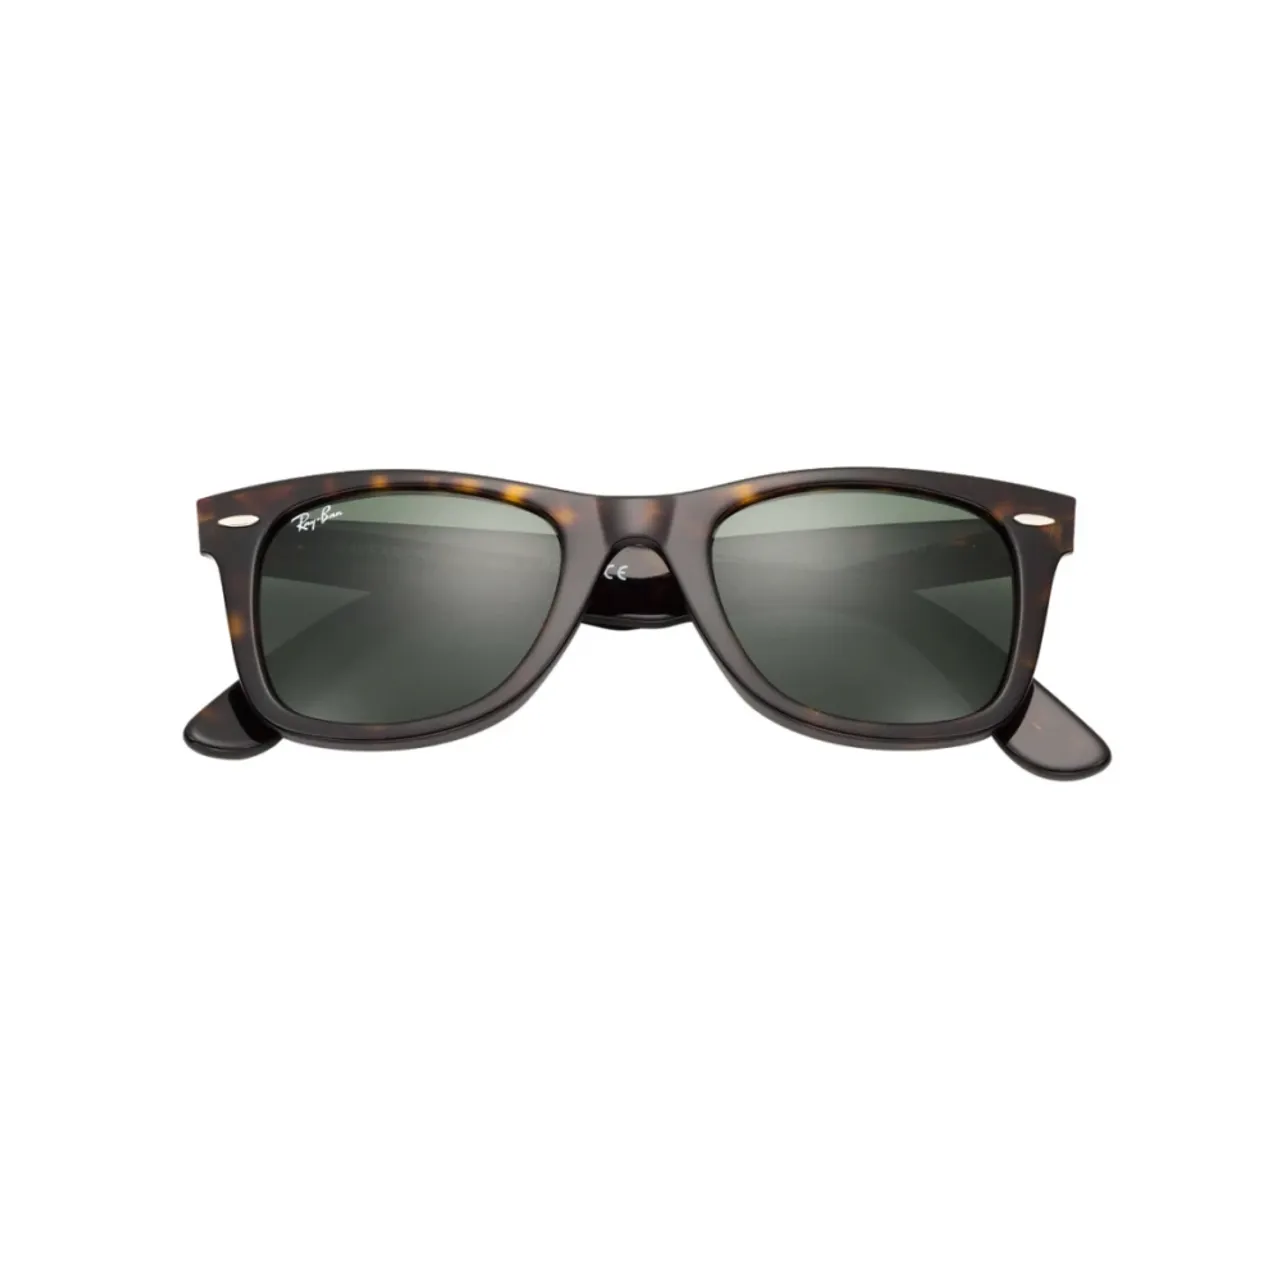 Ray-Ban , Sunglasses ,Brown unisex, Sizes: